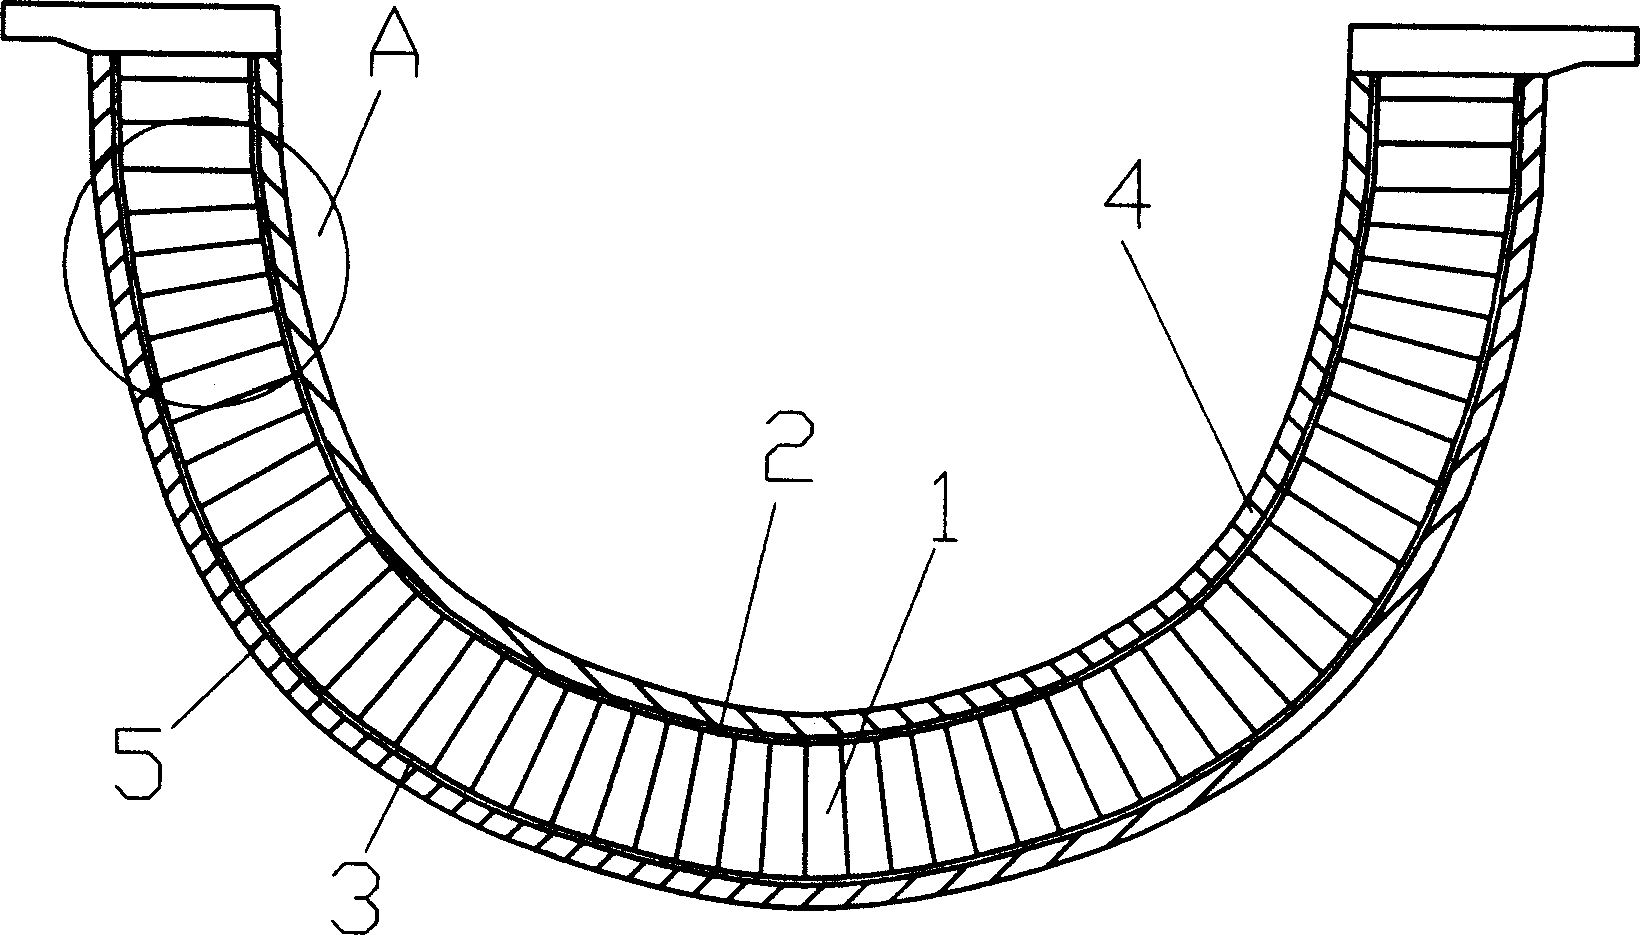 Rowing with superfine fibre and its formation